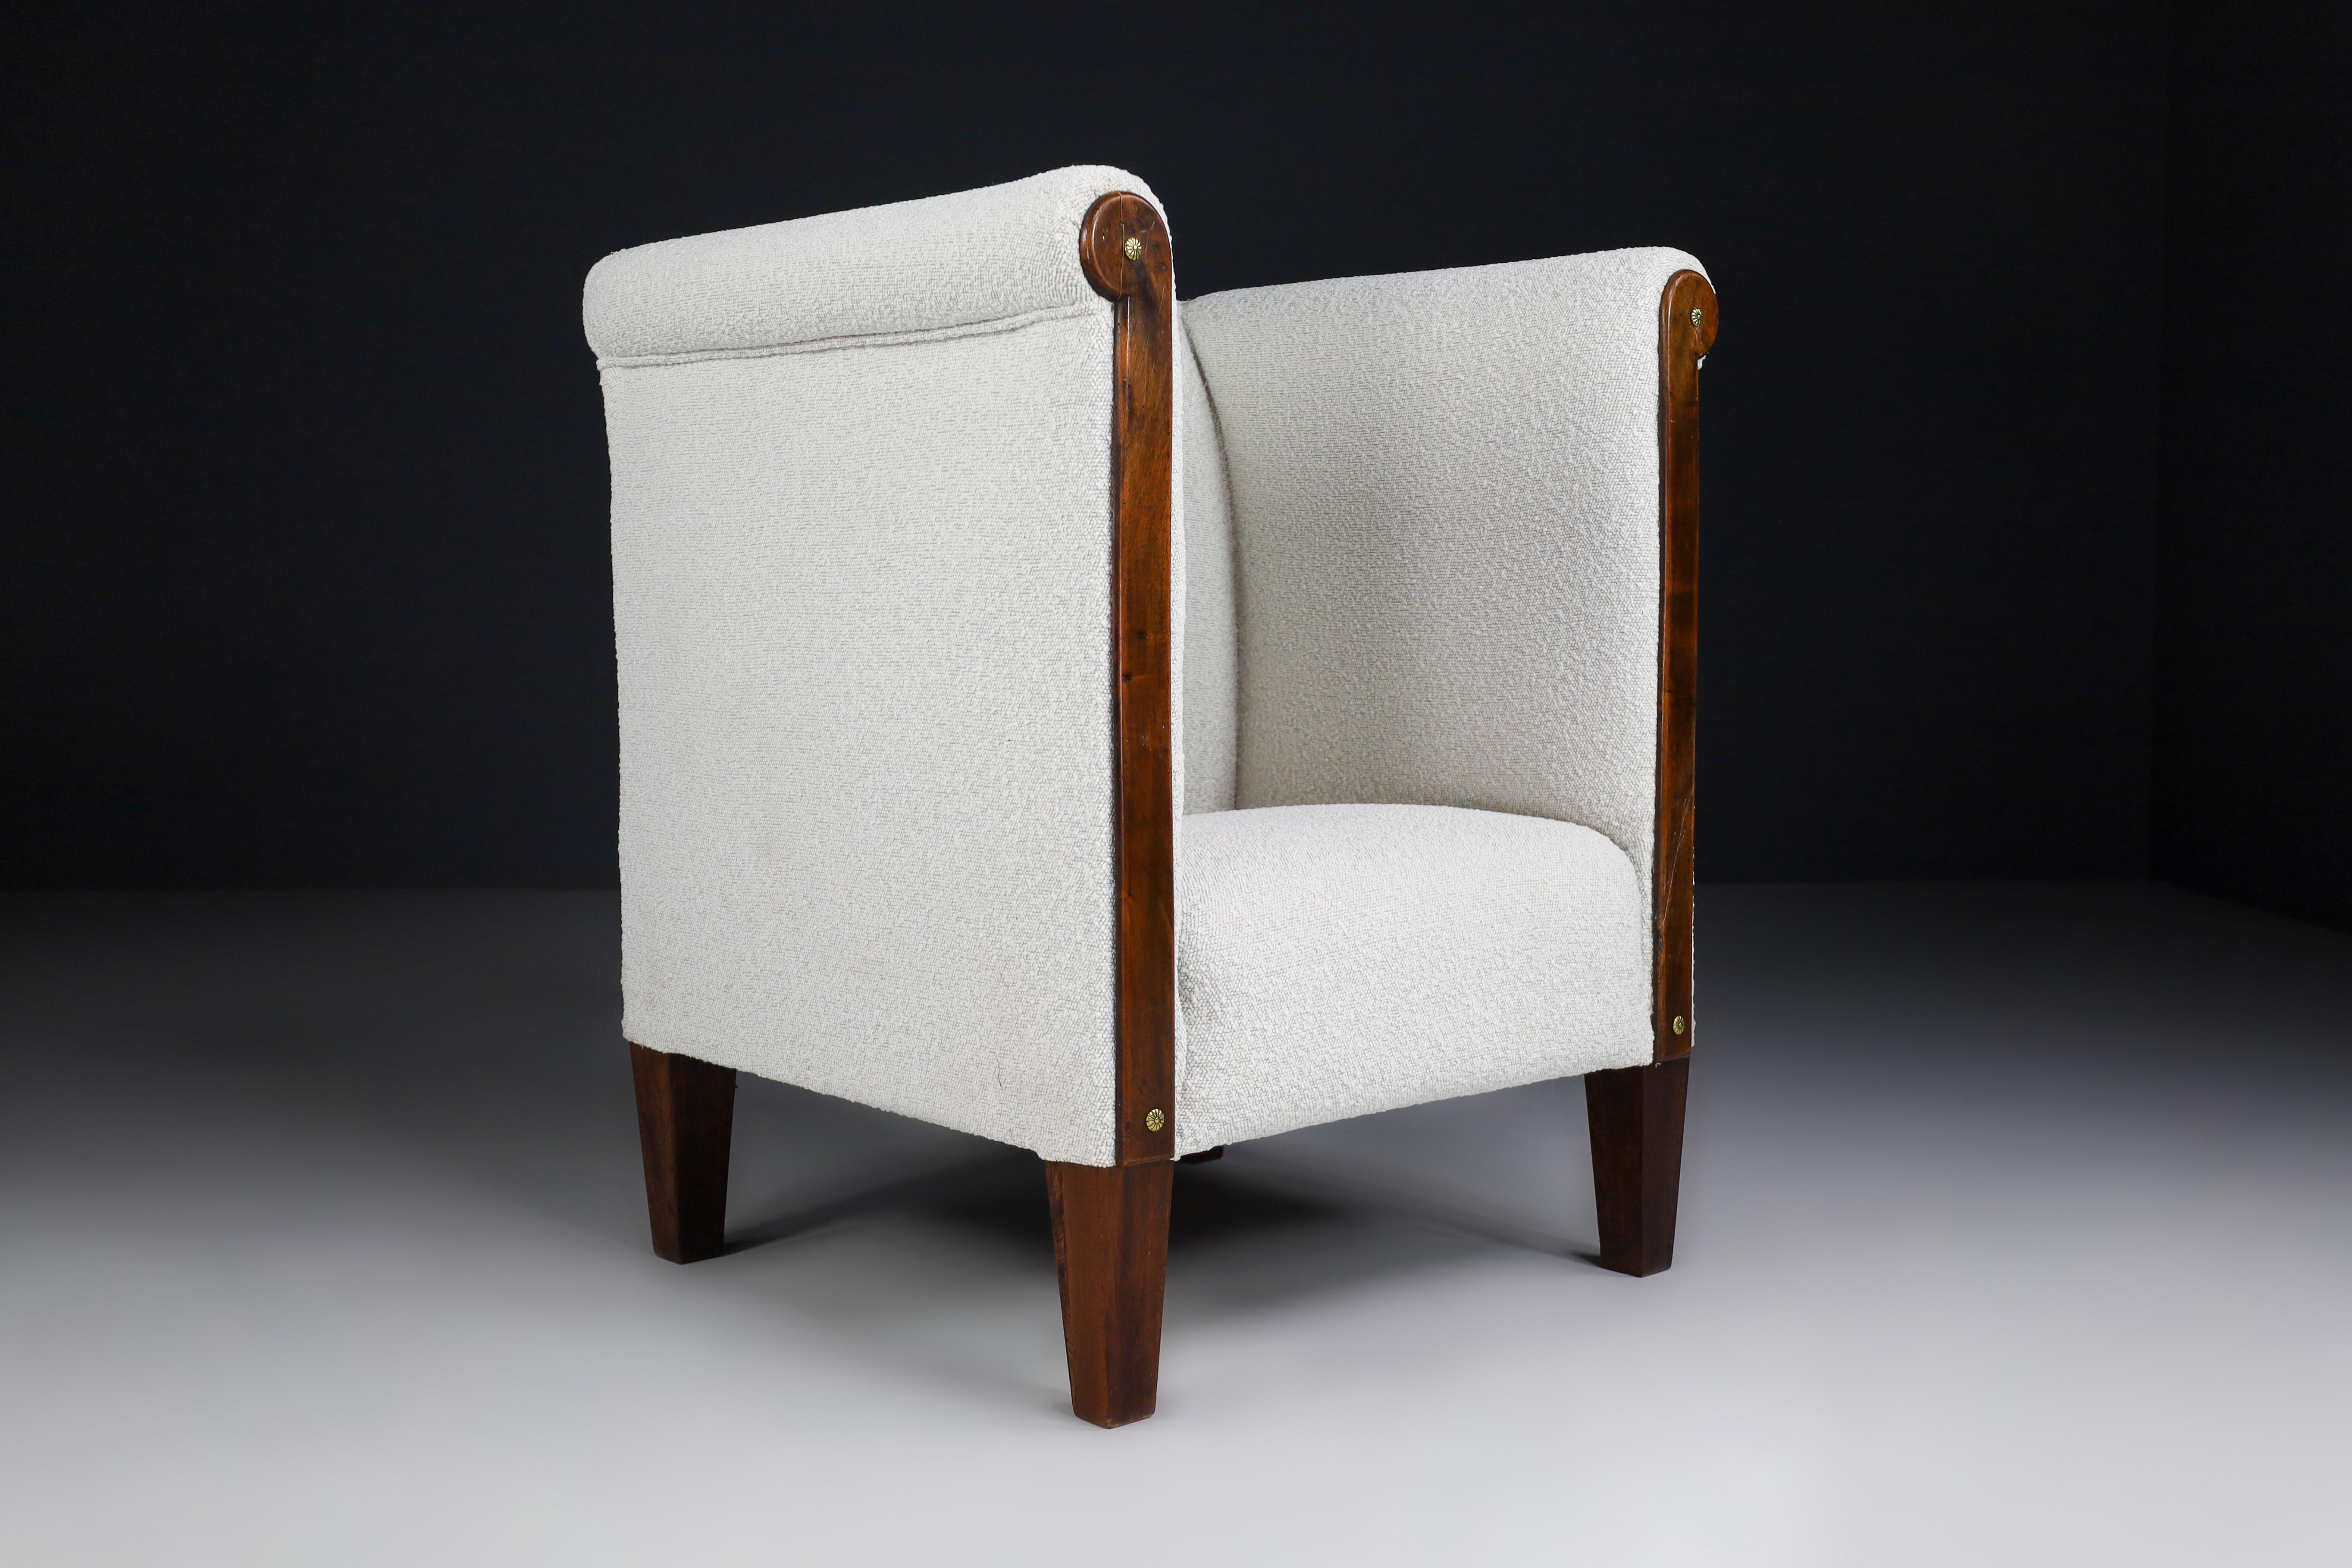 Art Deco Club chair made and designed in the 1930 in Austria, This rare model arm chair has just been reupholstered with Bouclé fabric and have nice tapered wood legs. It is in perfect vintage condition, minor patina on wood parts. This amazing club